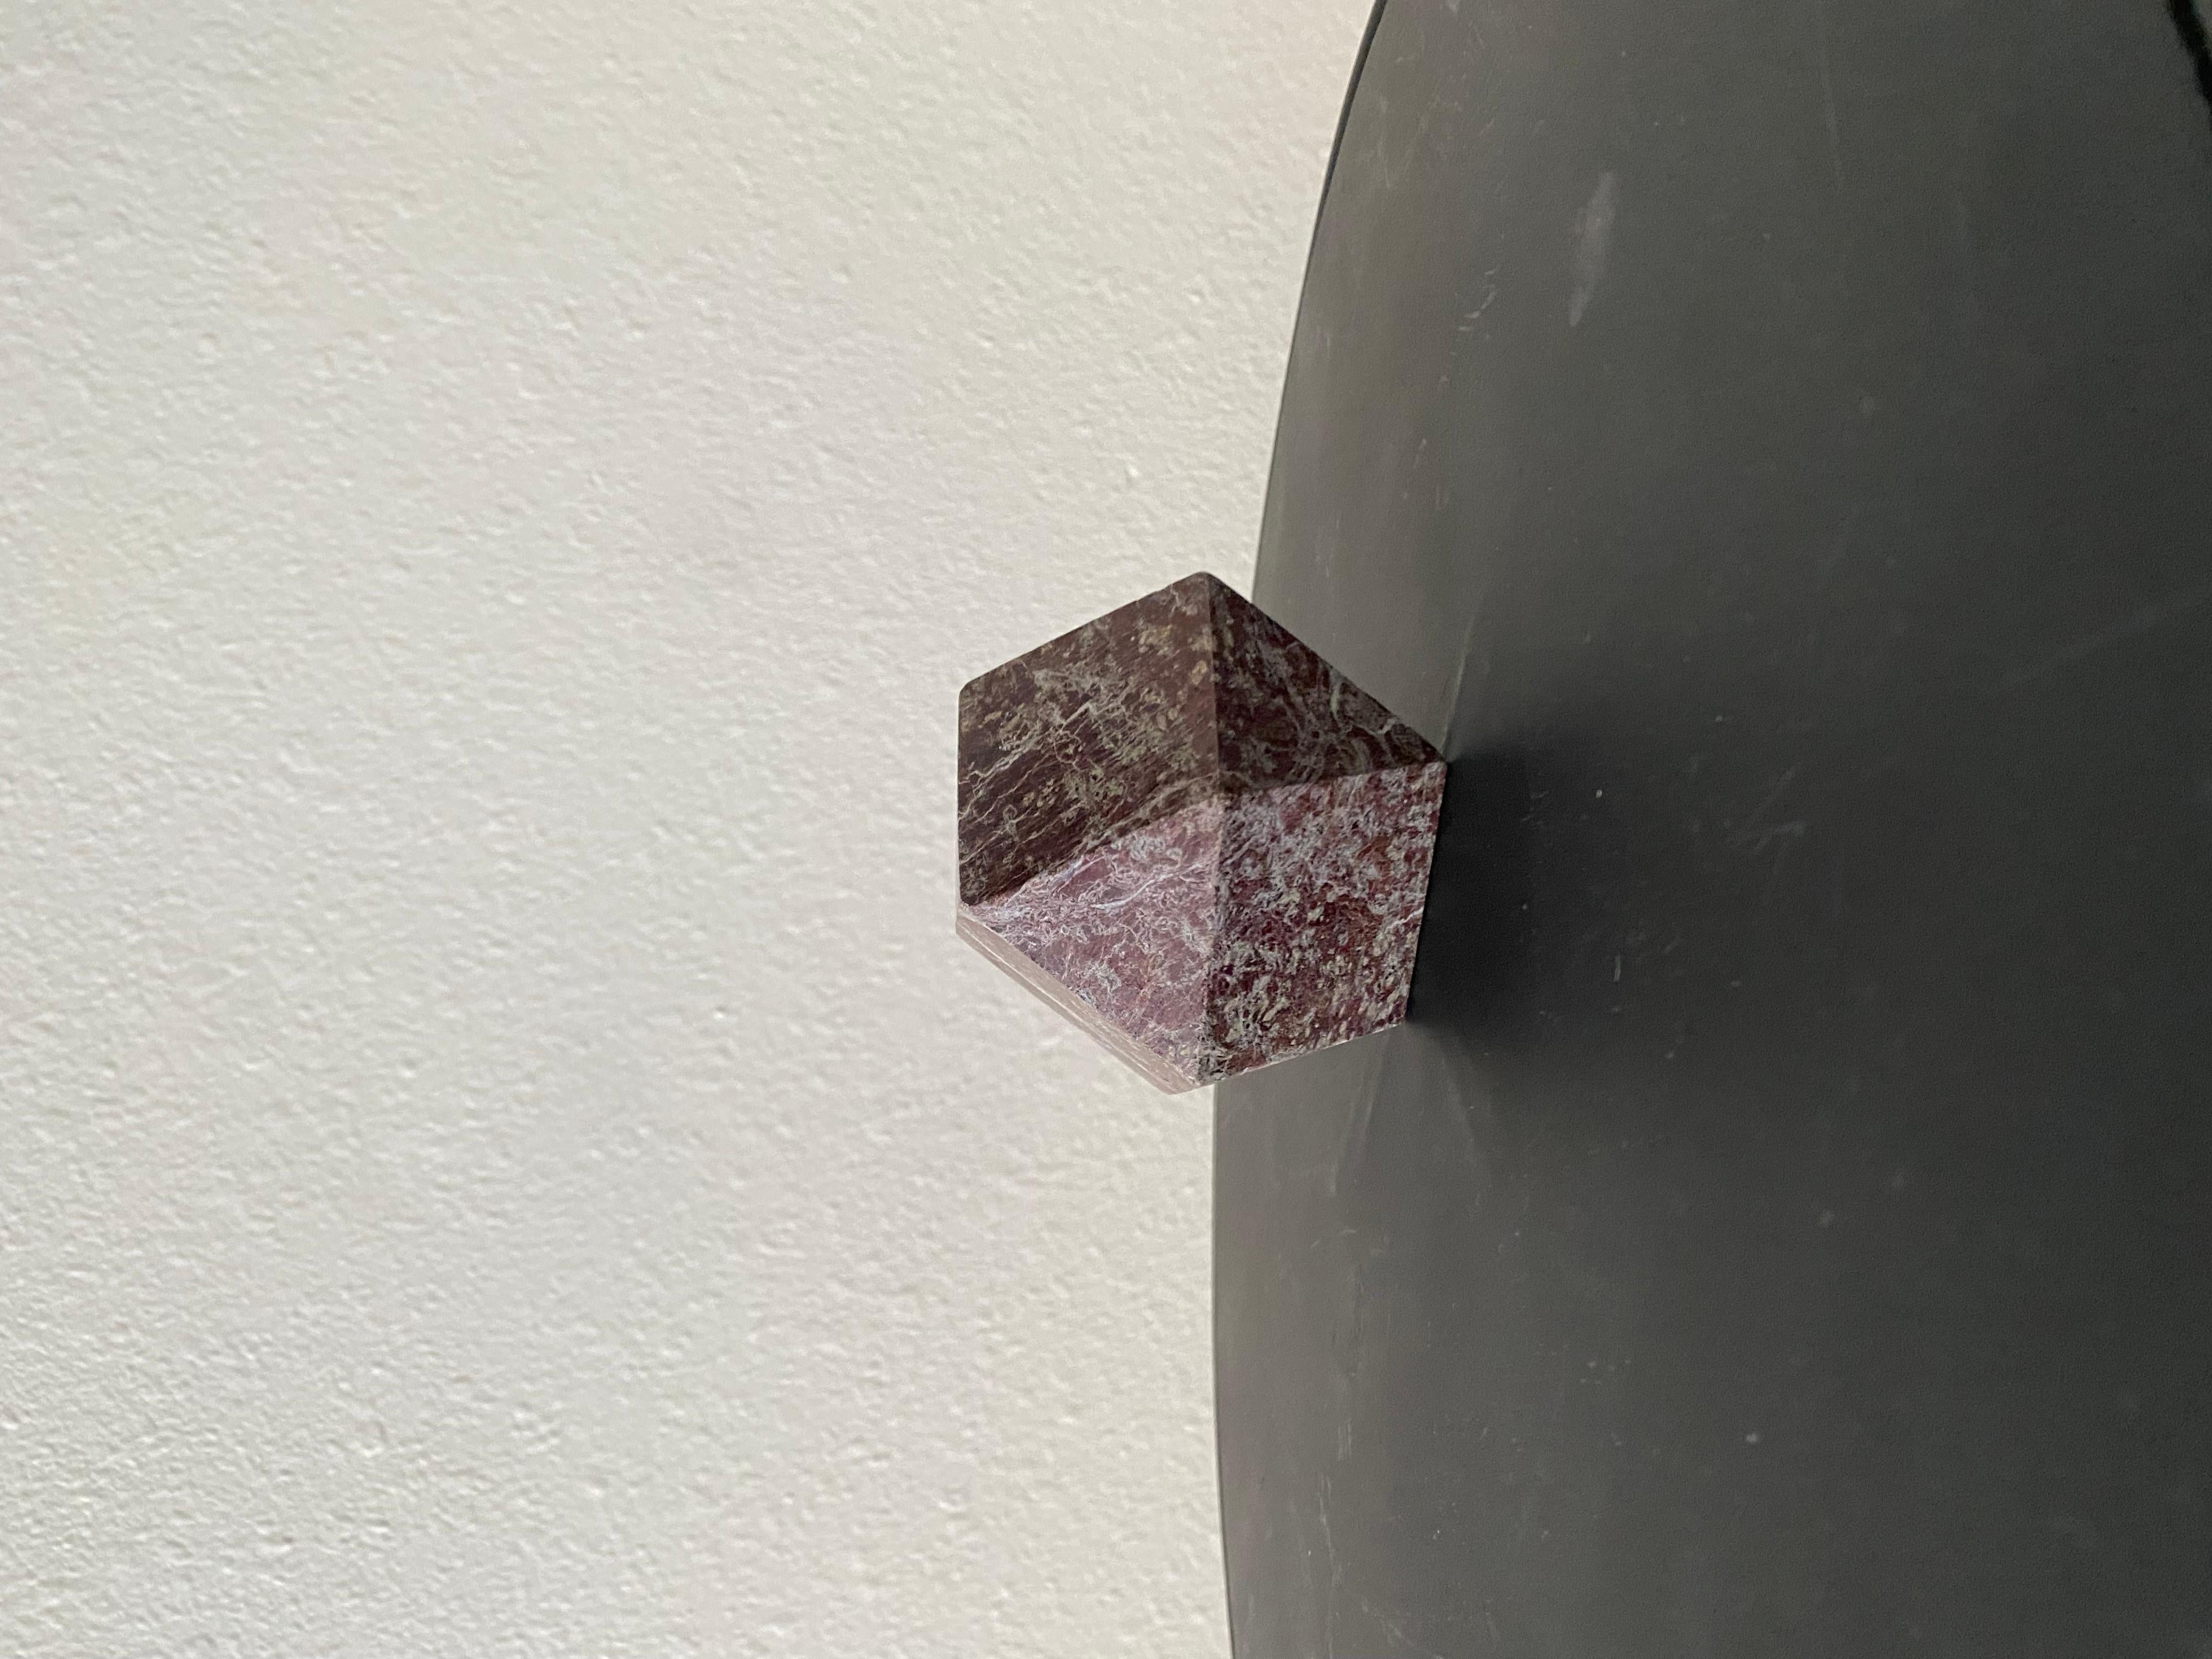 A lovely small Marble Geometric Sculpture boasting red and grey colors. An amazing addition to any office or living area.